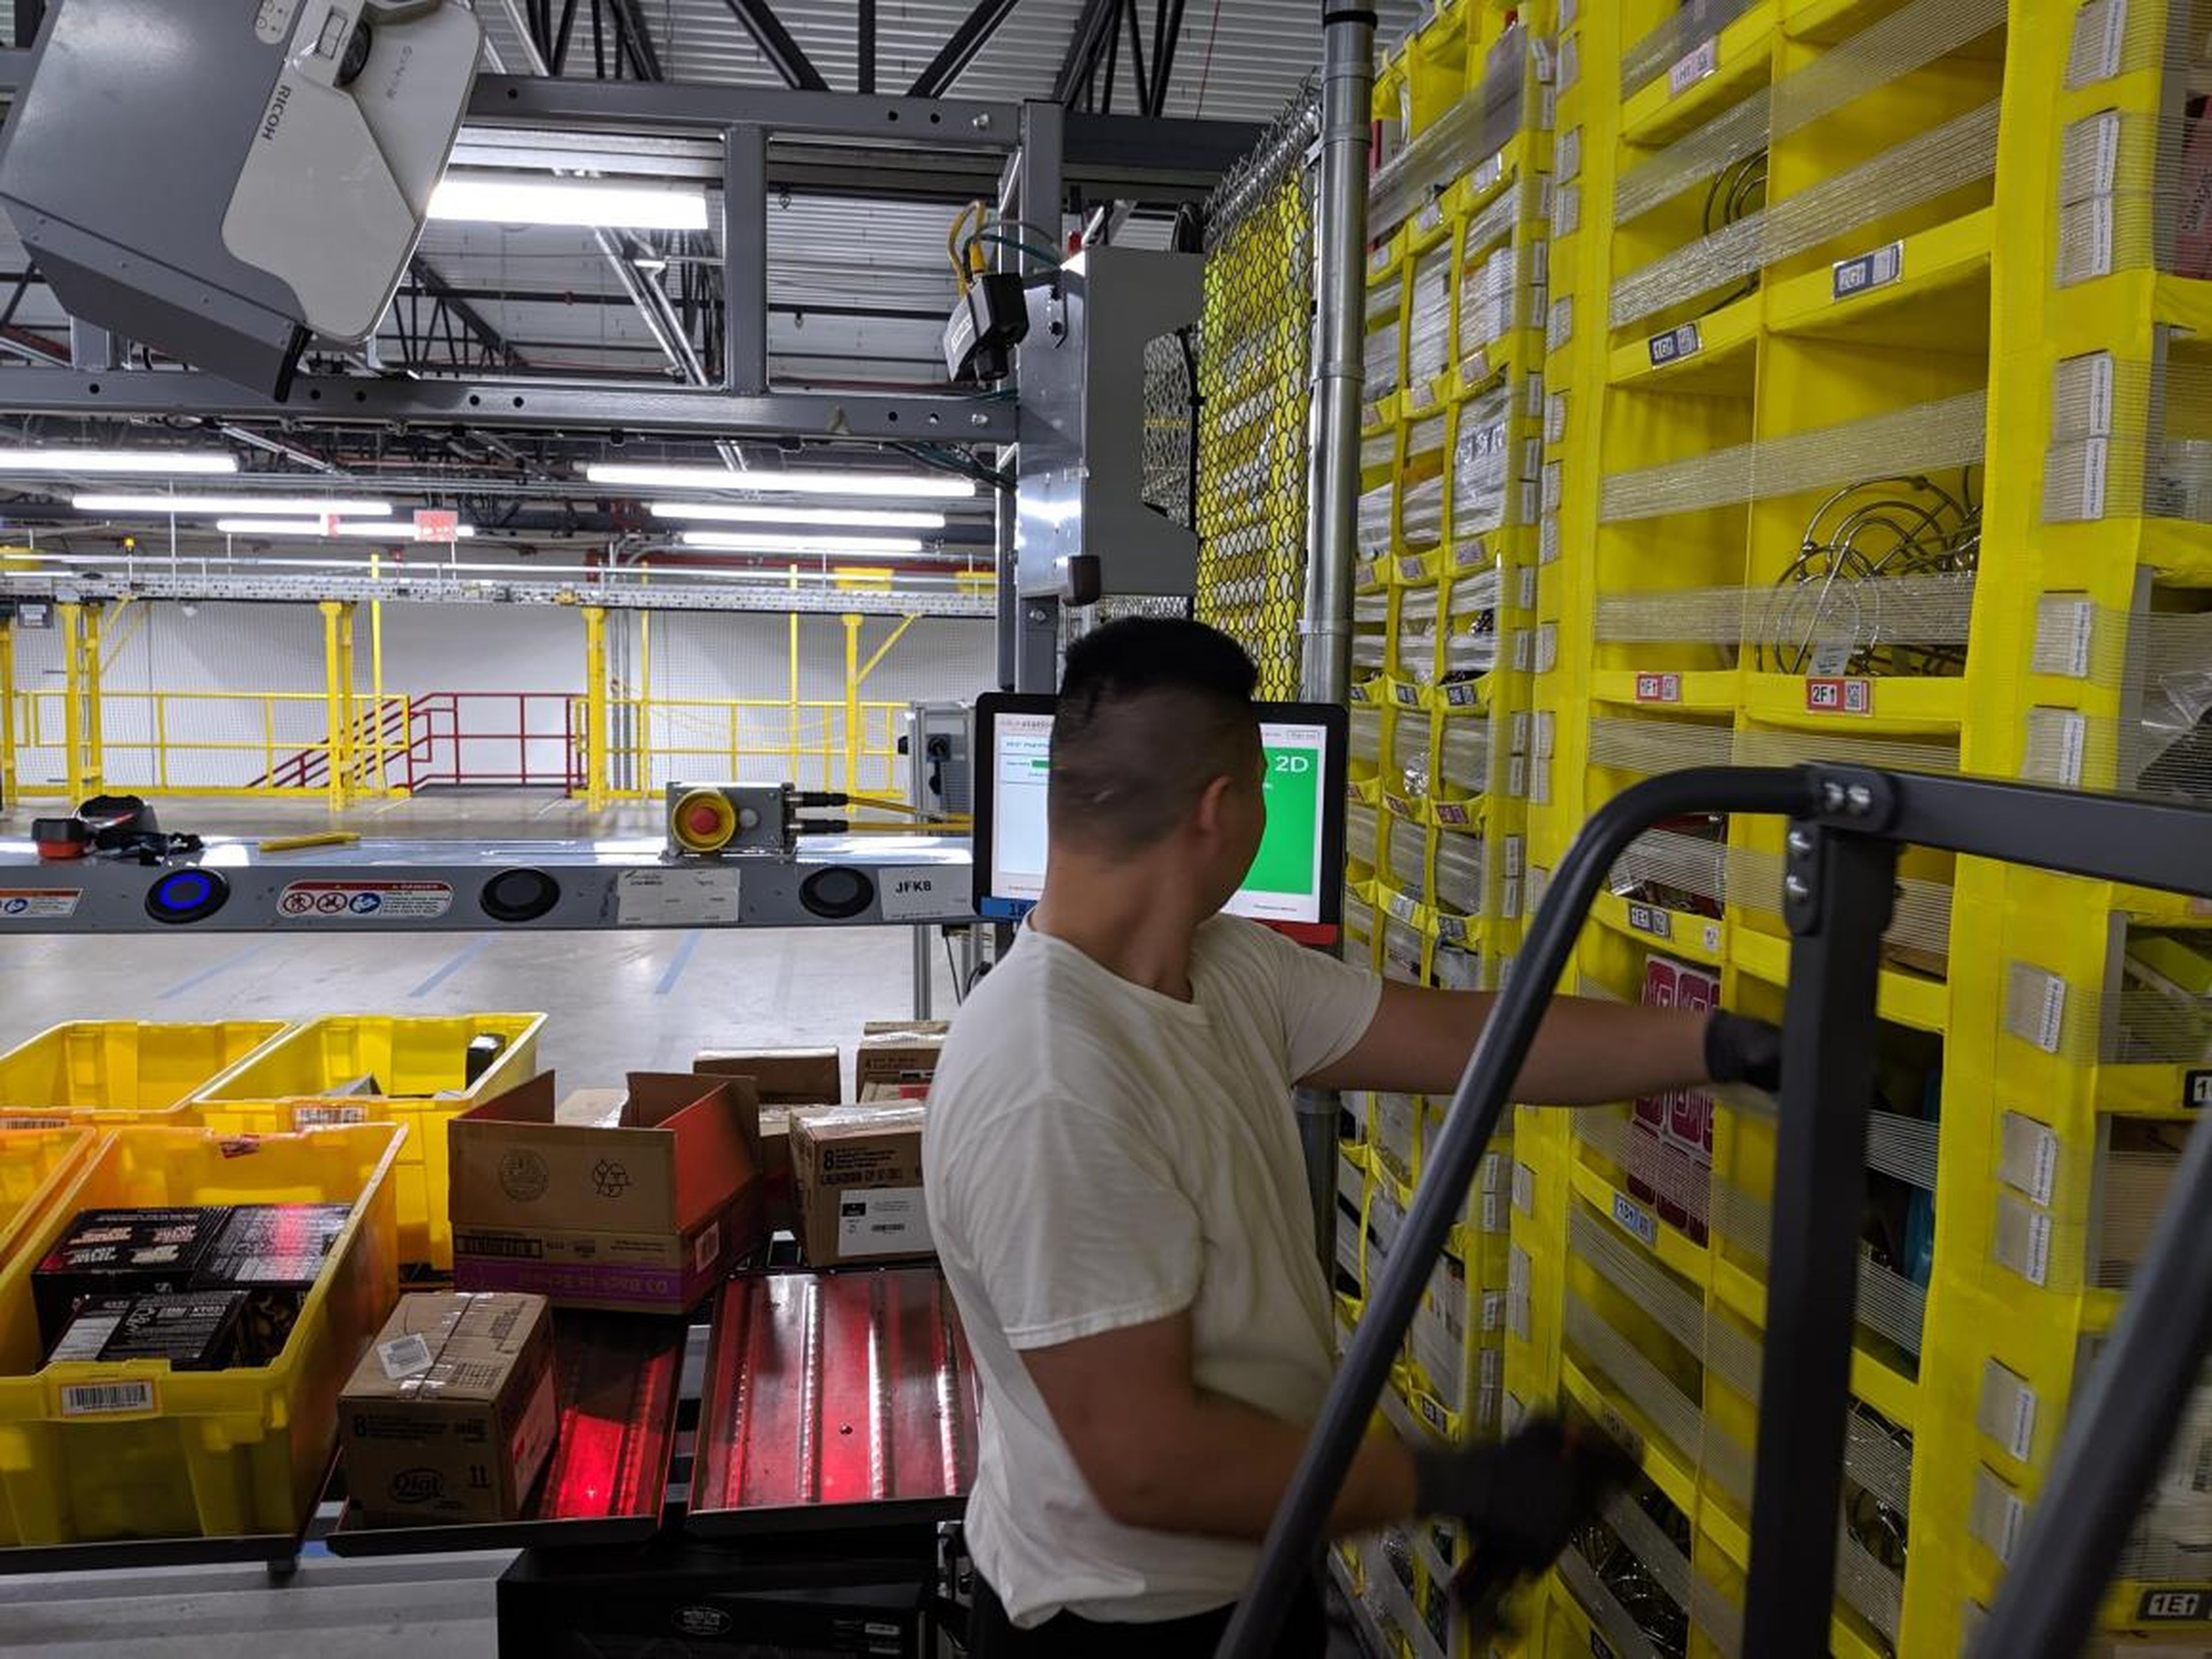 To this employee's left, totes come in full of products. Each item is scanned, which sets off a series of automated actions that guide the employee to where to place the item on the storage compartment.